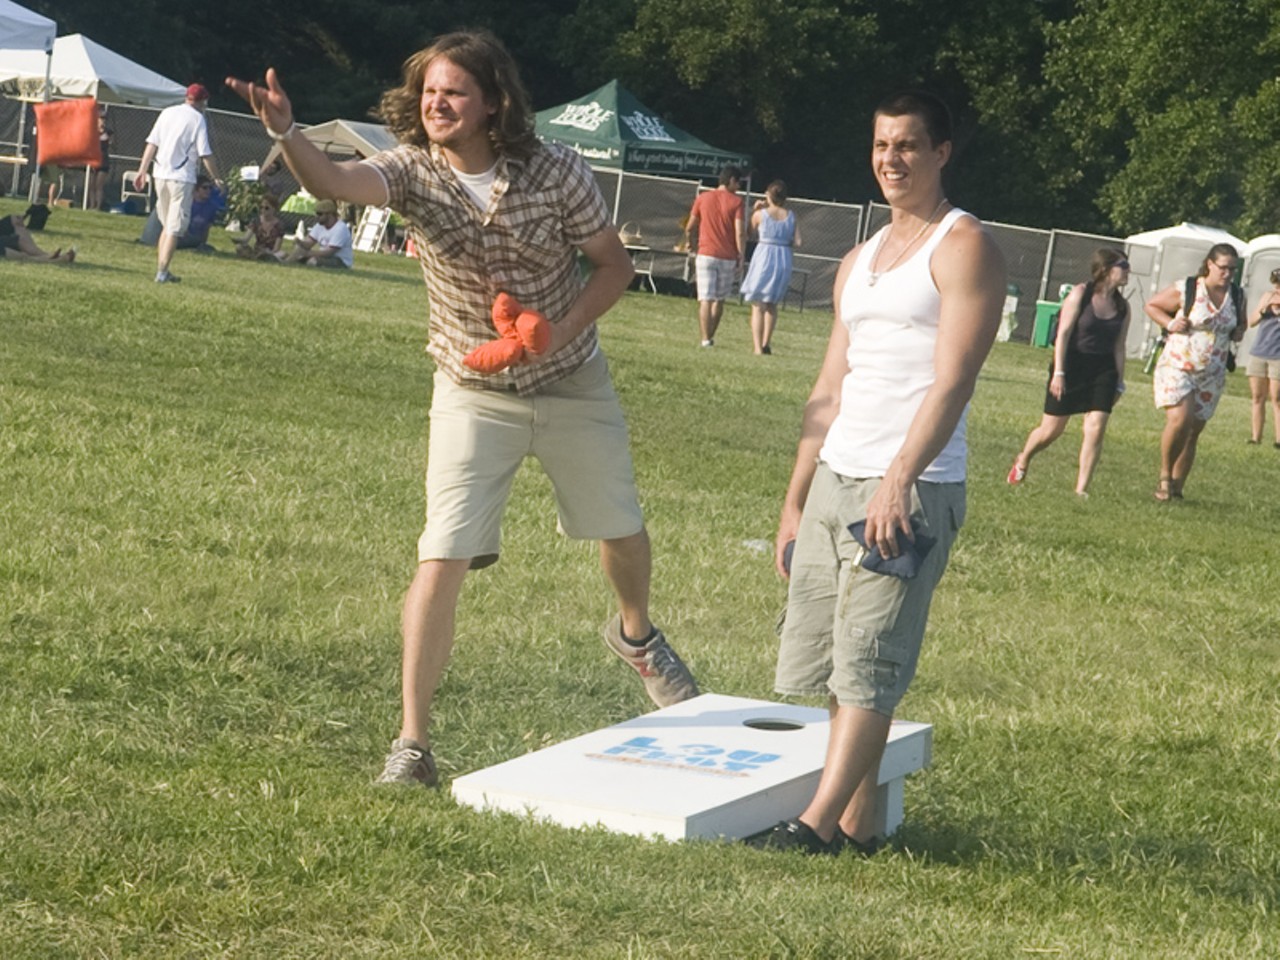 LouFest attendees playing a game of Bags.